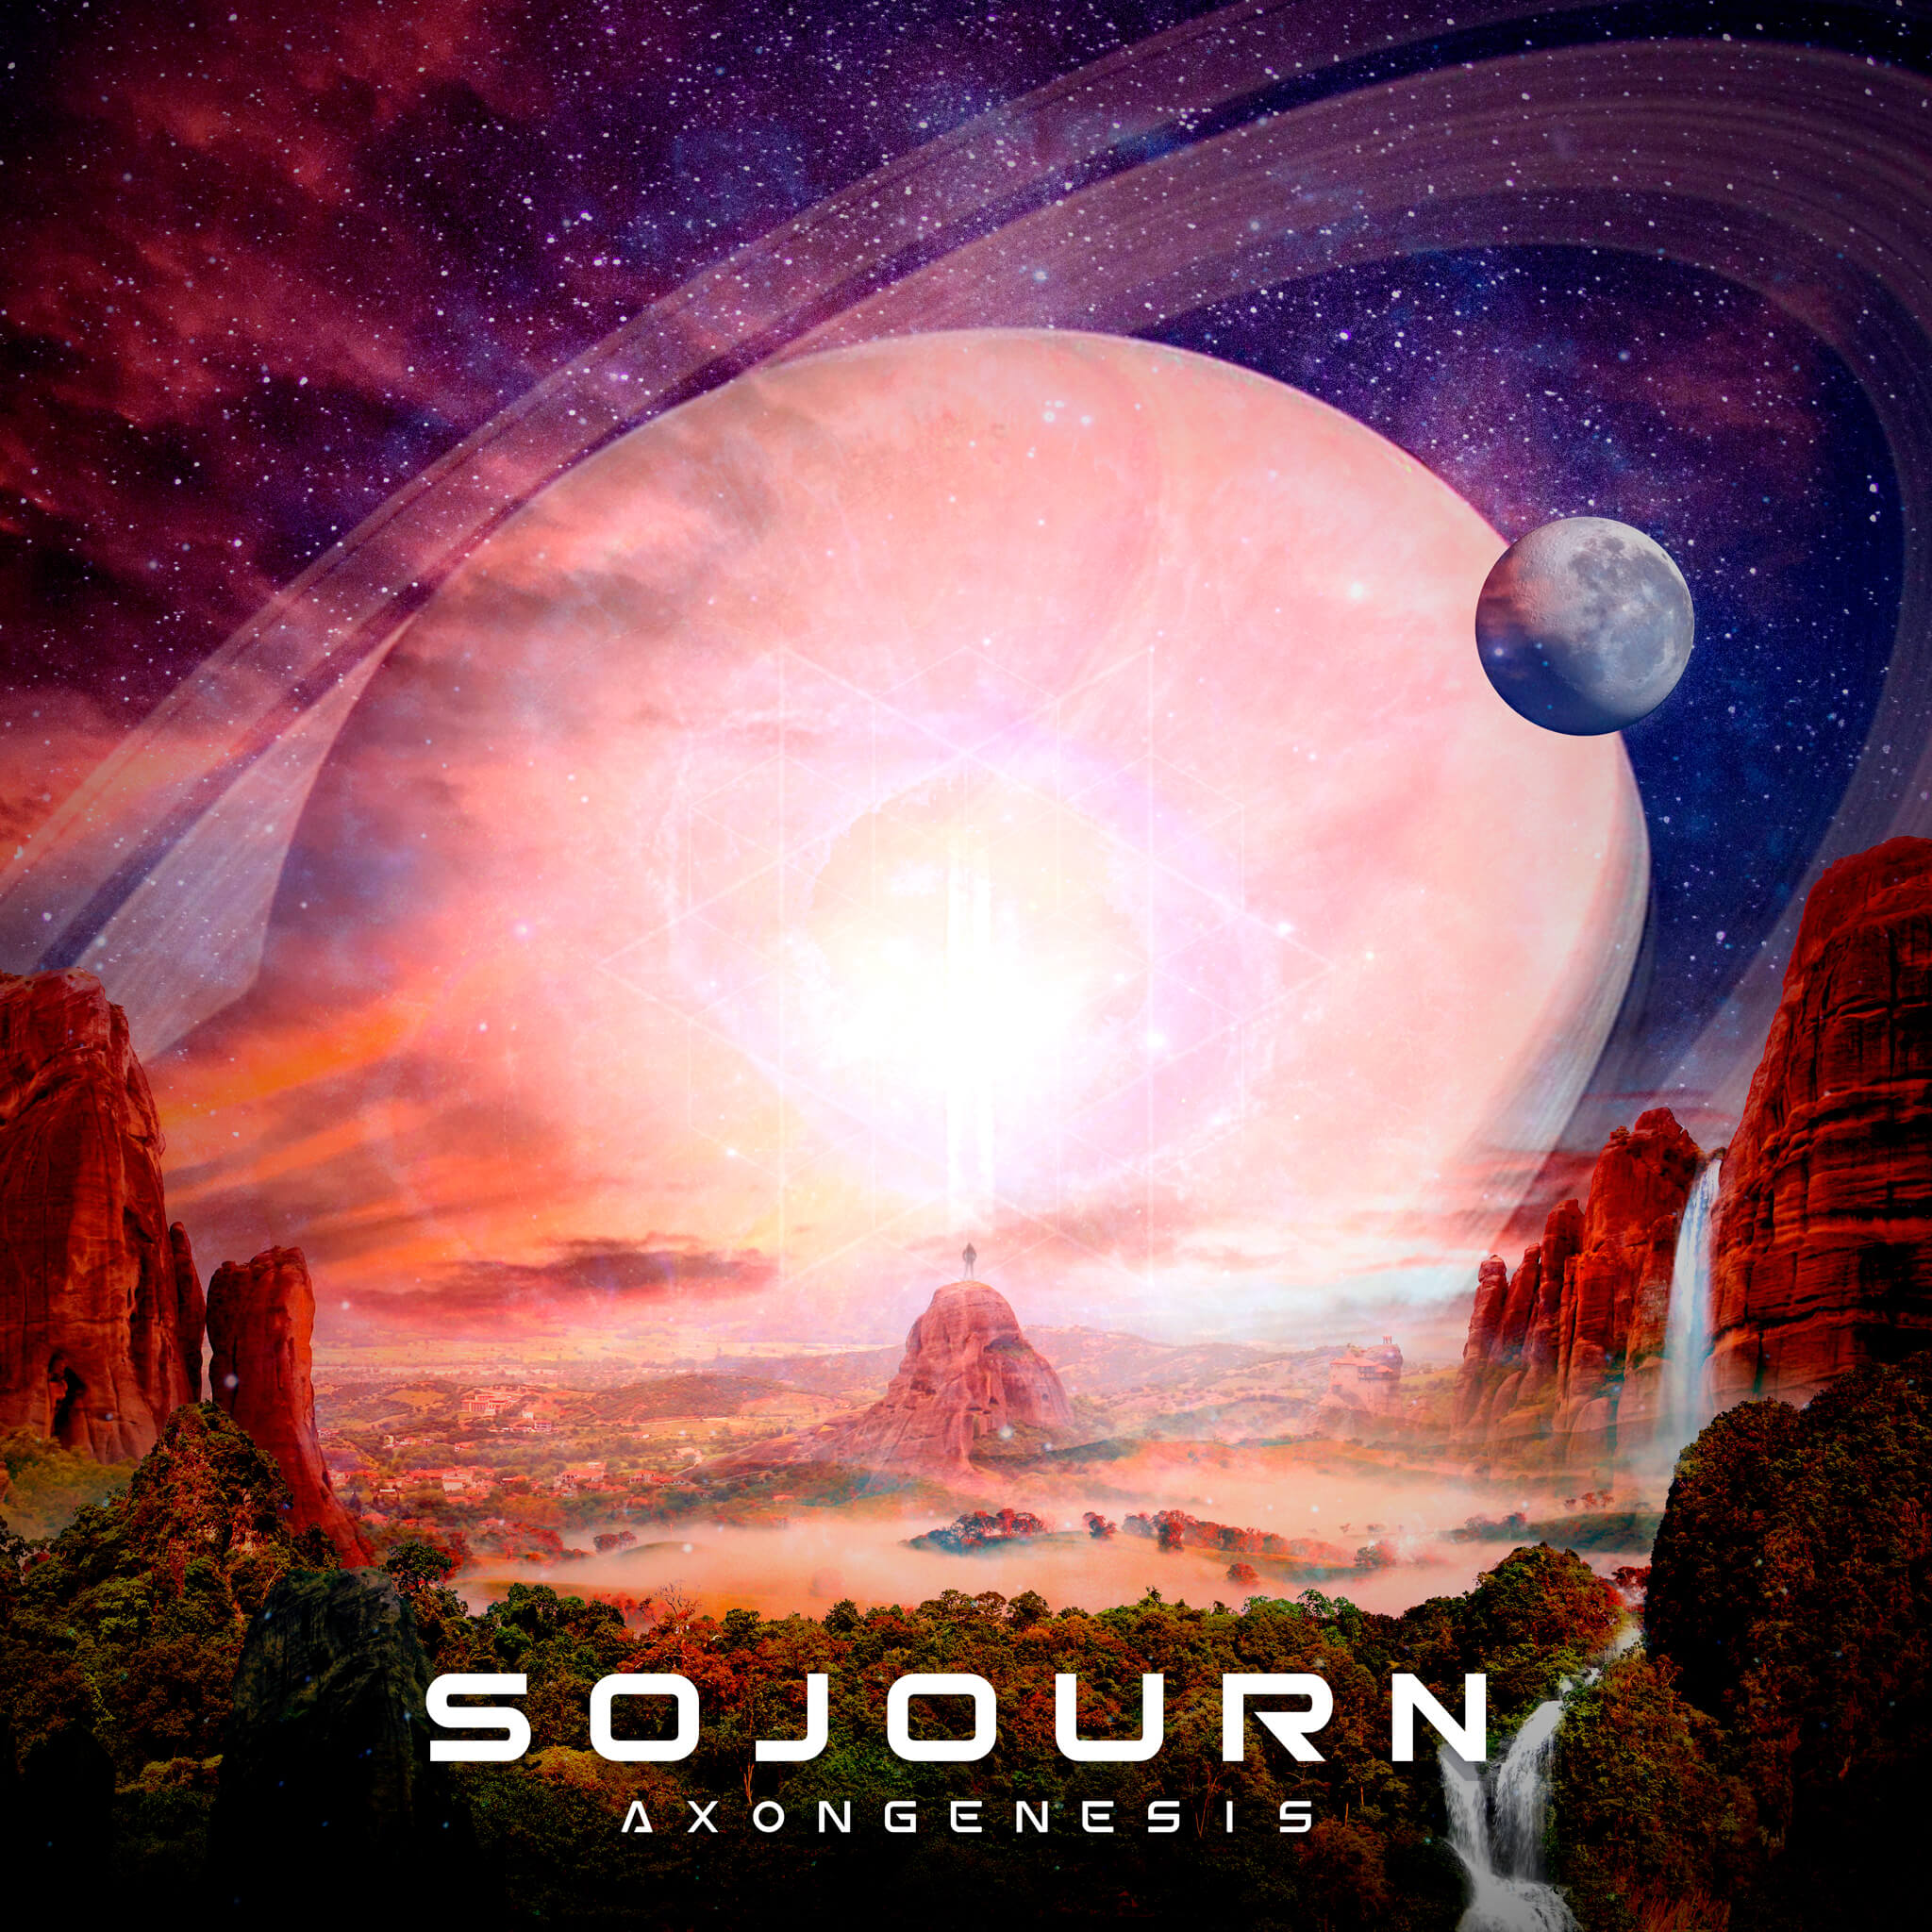 Sojourn Music and Cover Art by Axon Genesis